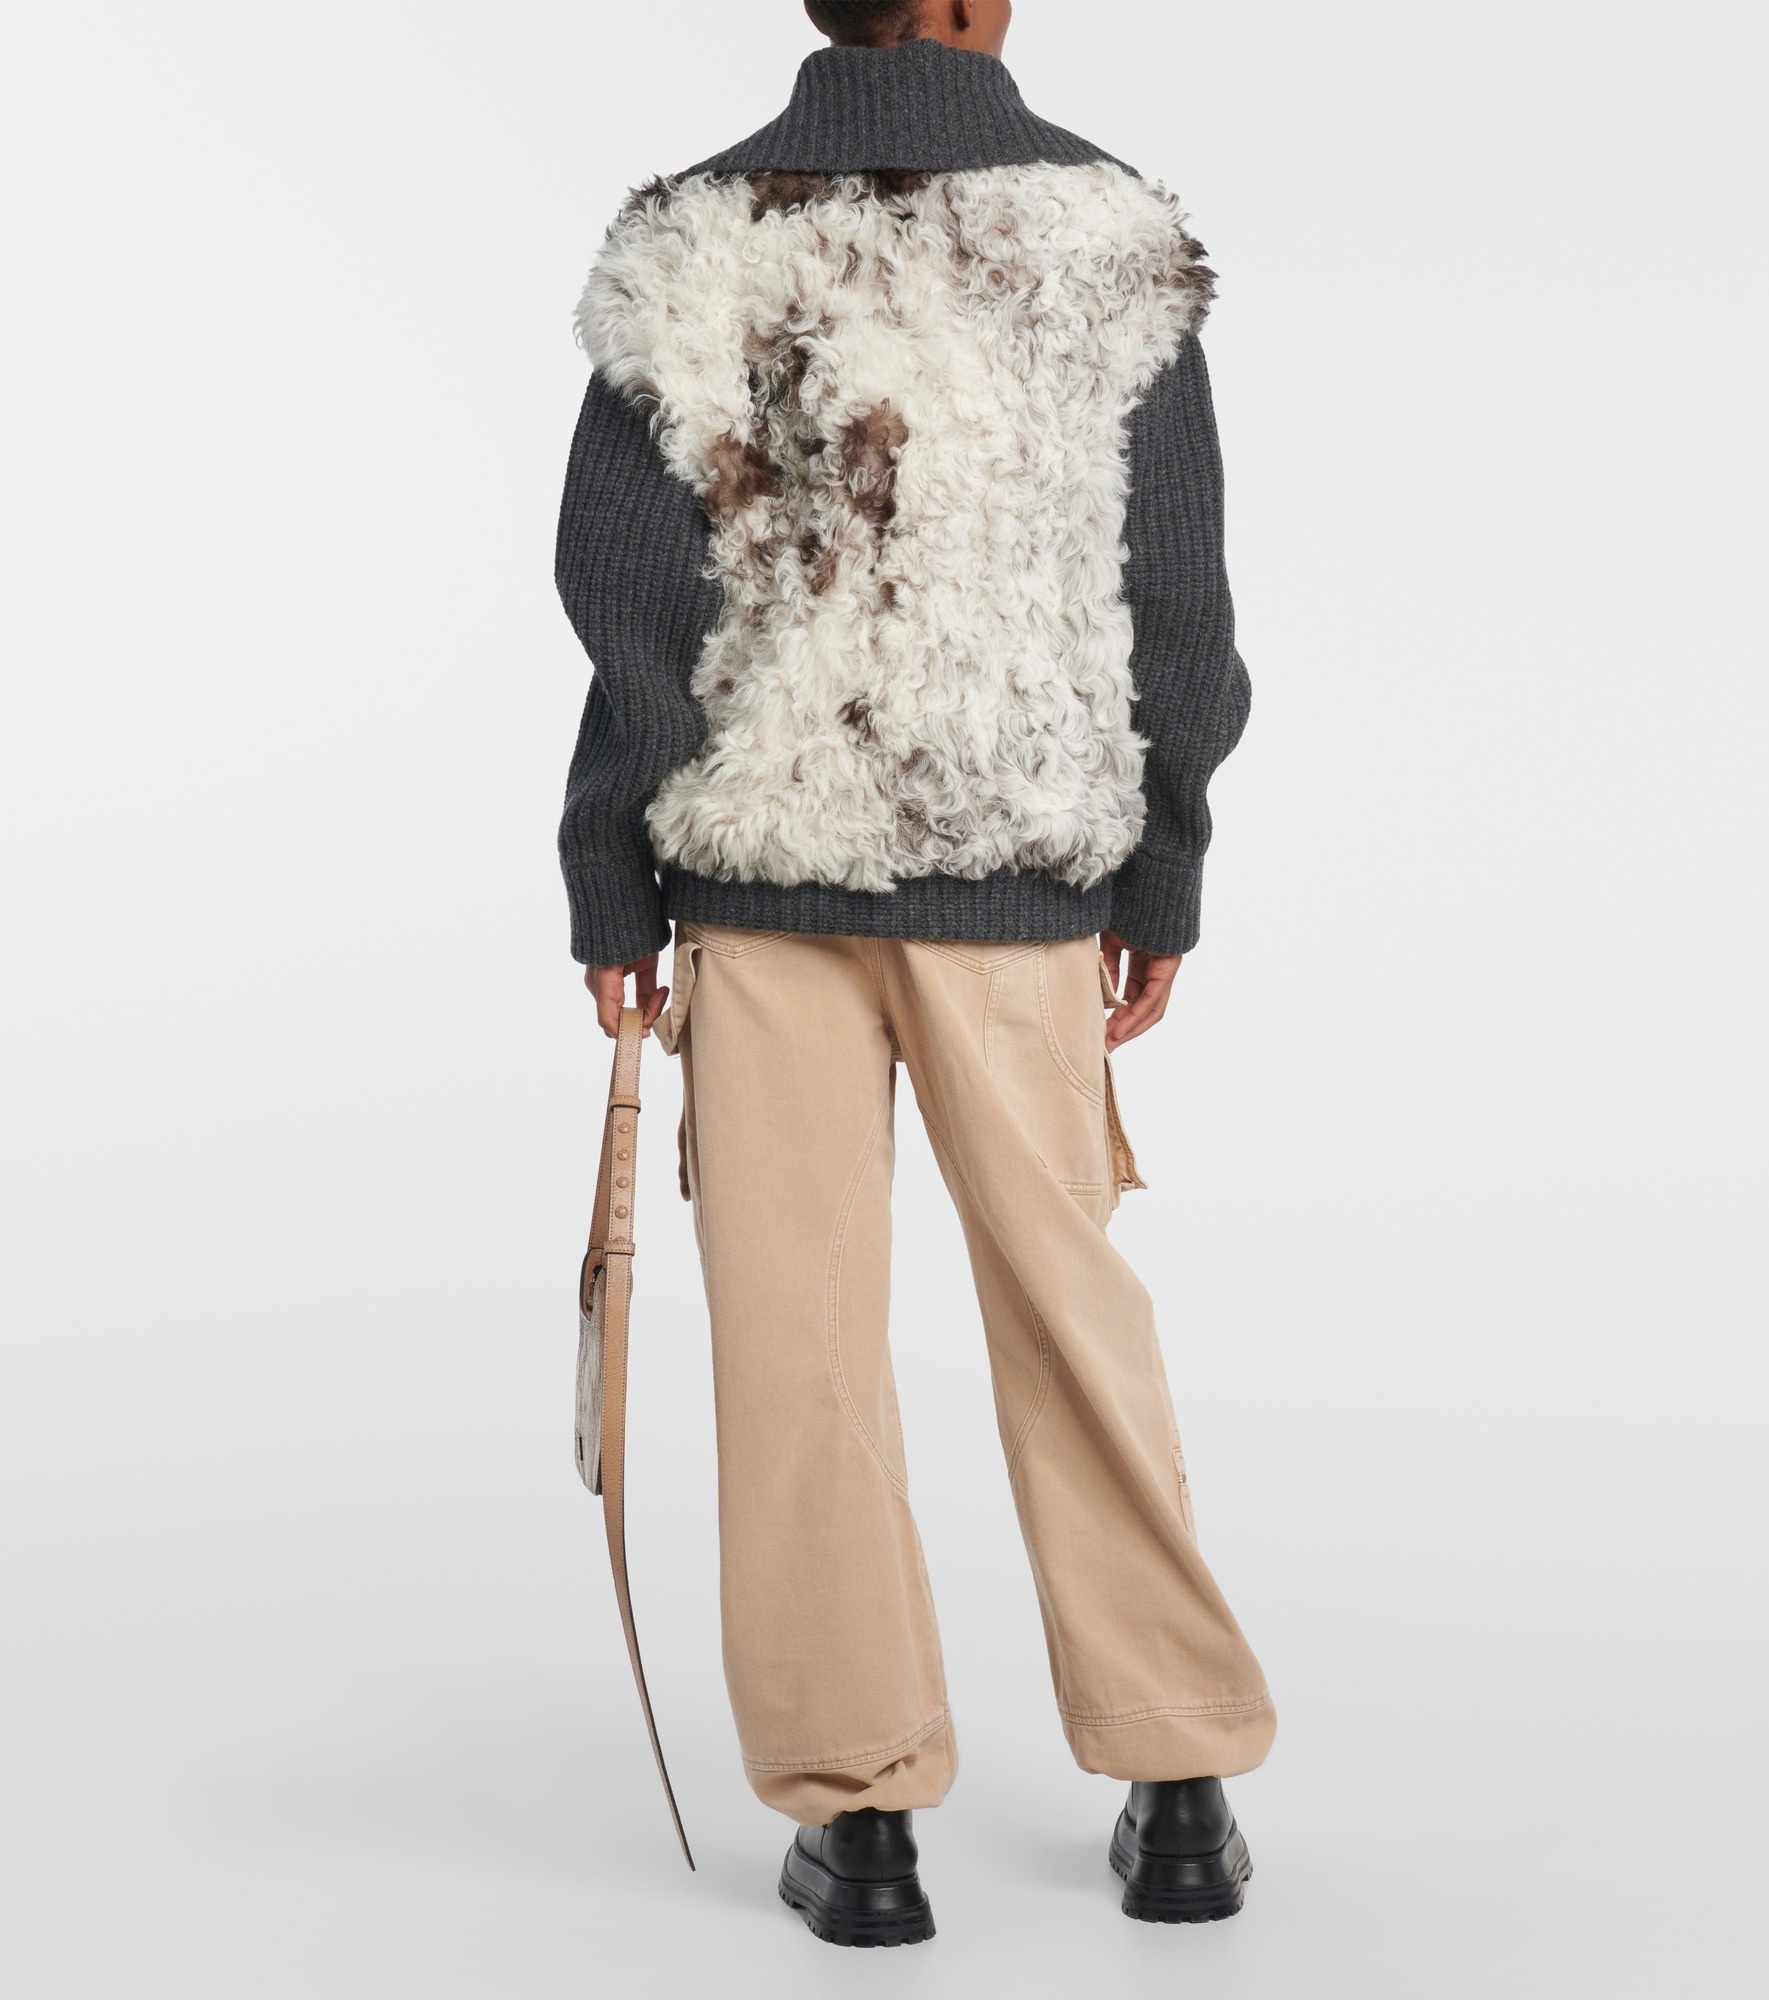 The Big Chill shearling and wool jacket - 3